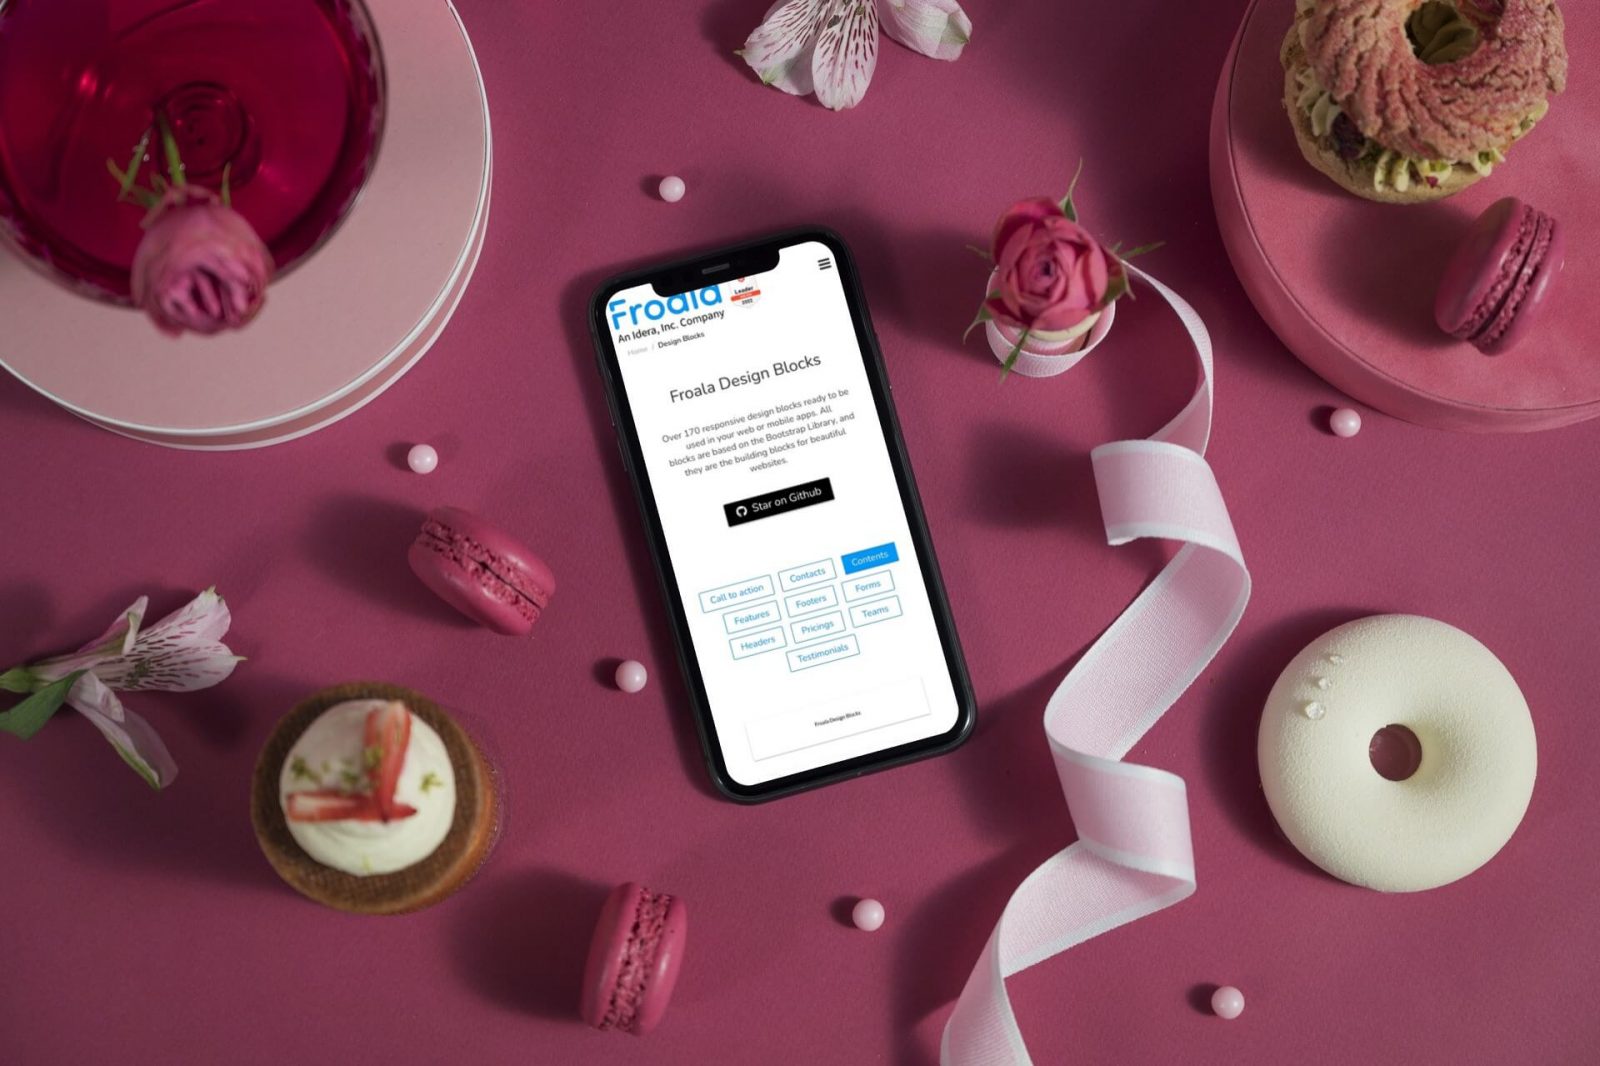 A smartphone displaying design blocks, surrounded by macarons and flowers on a pink surface.